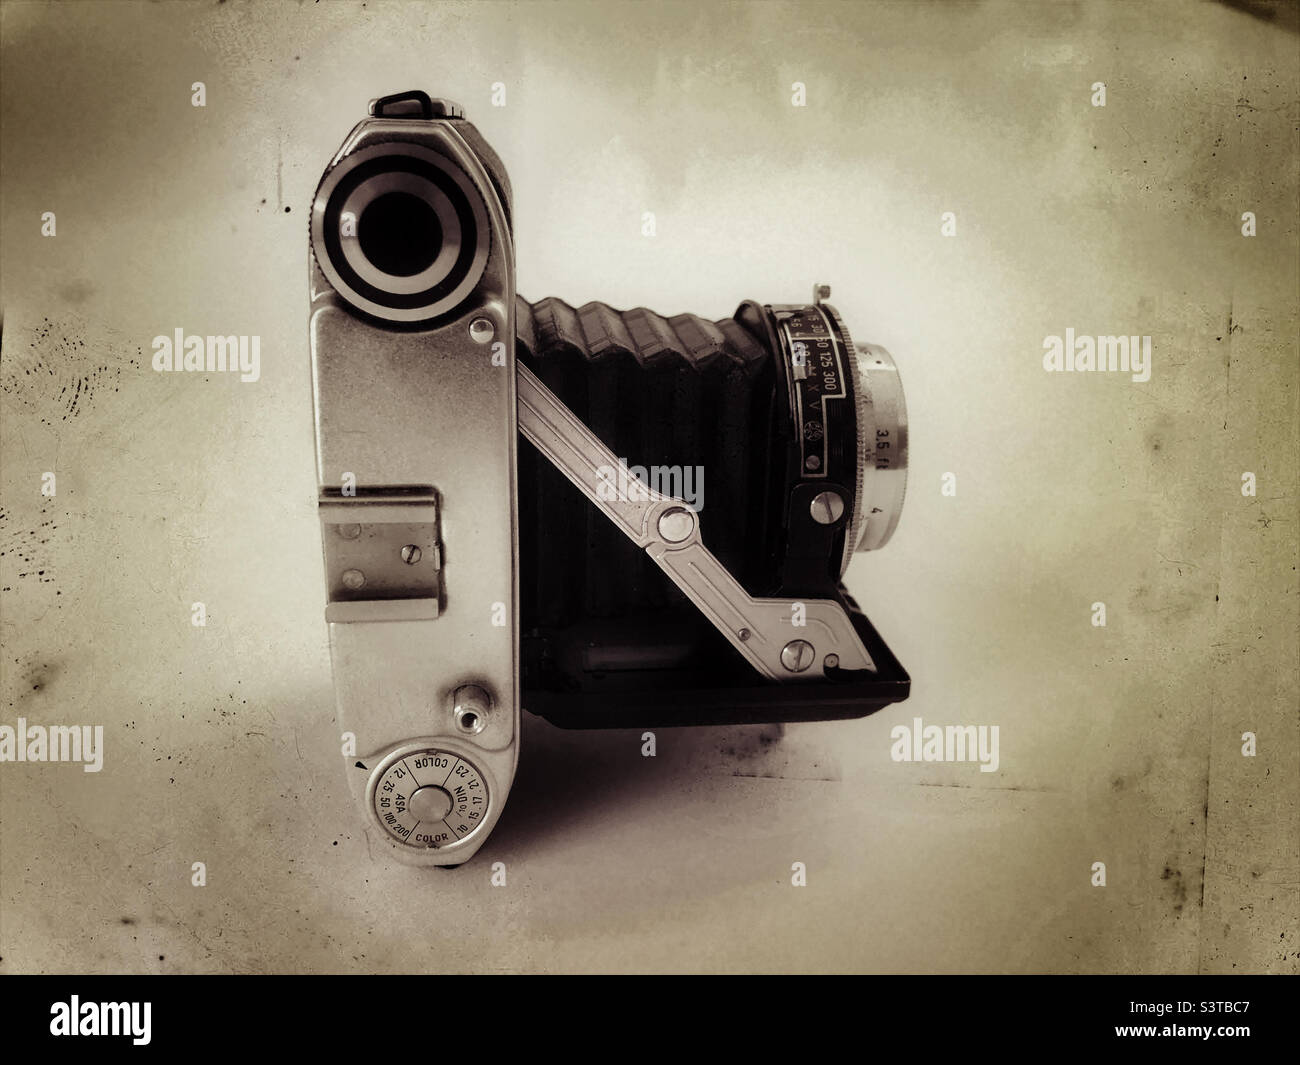 Vintage folding photographic camera photographed from side view. Image edited to give it vintage look Stock Photo